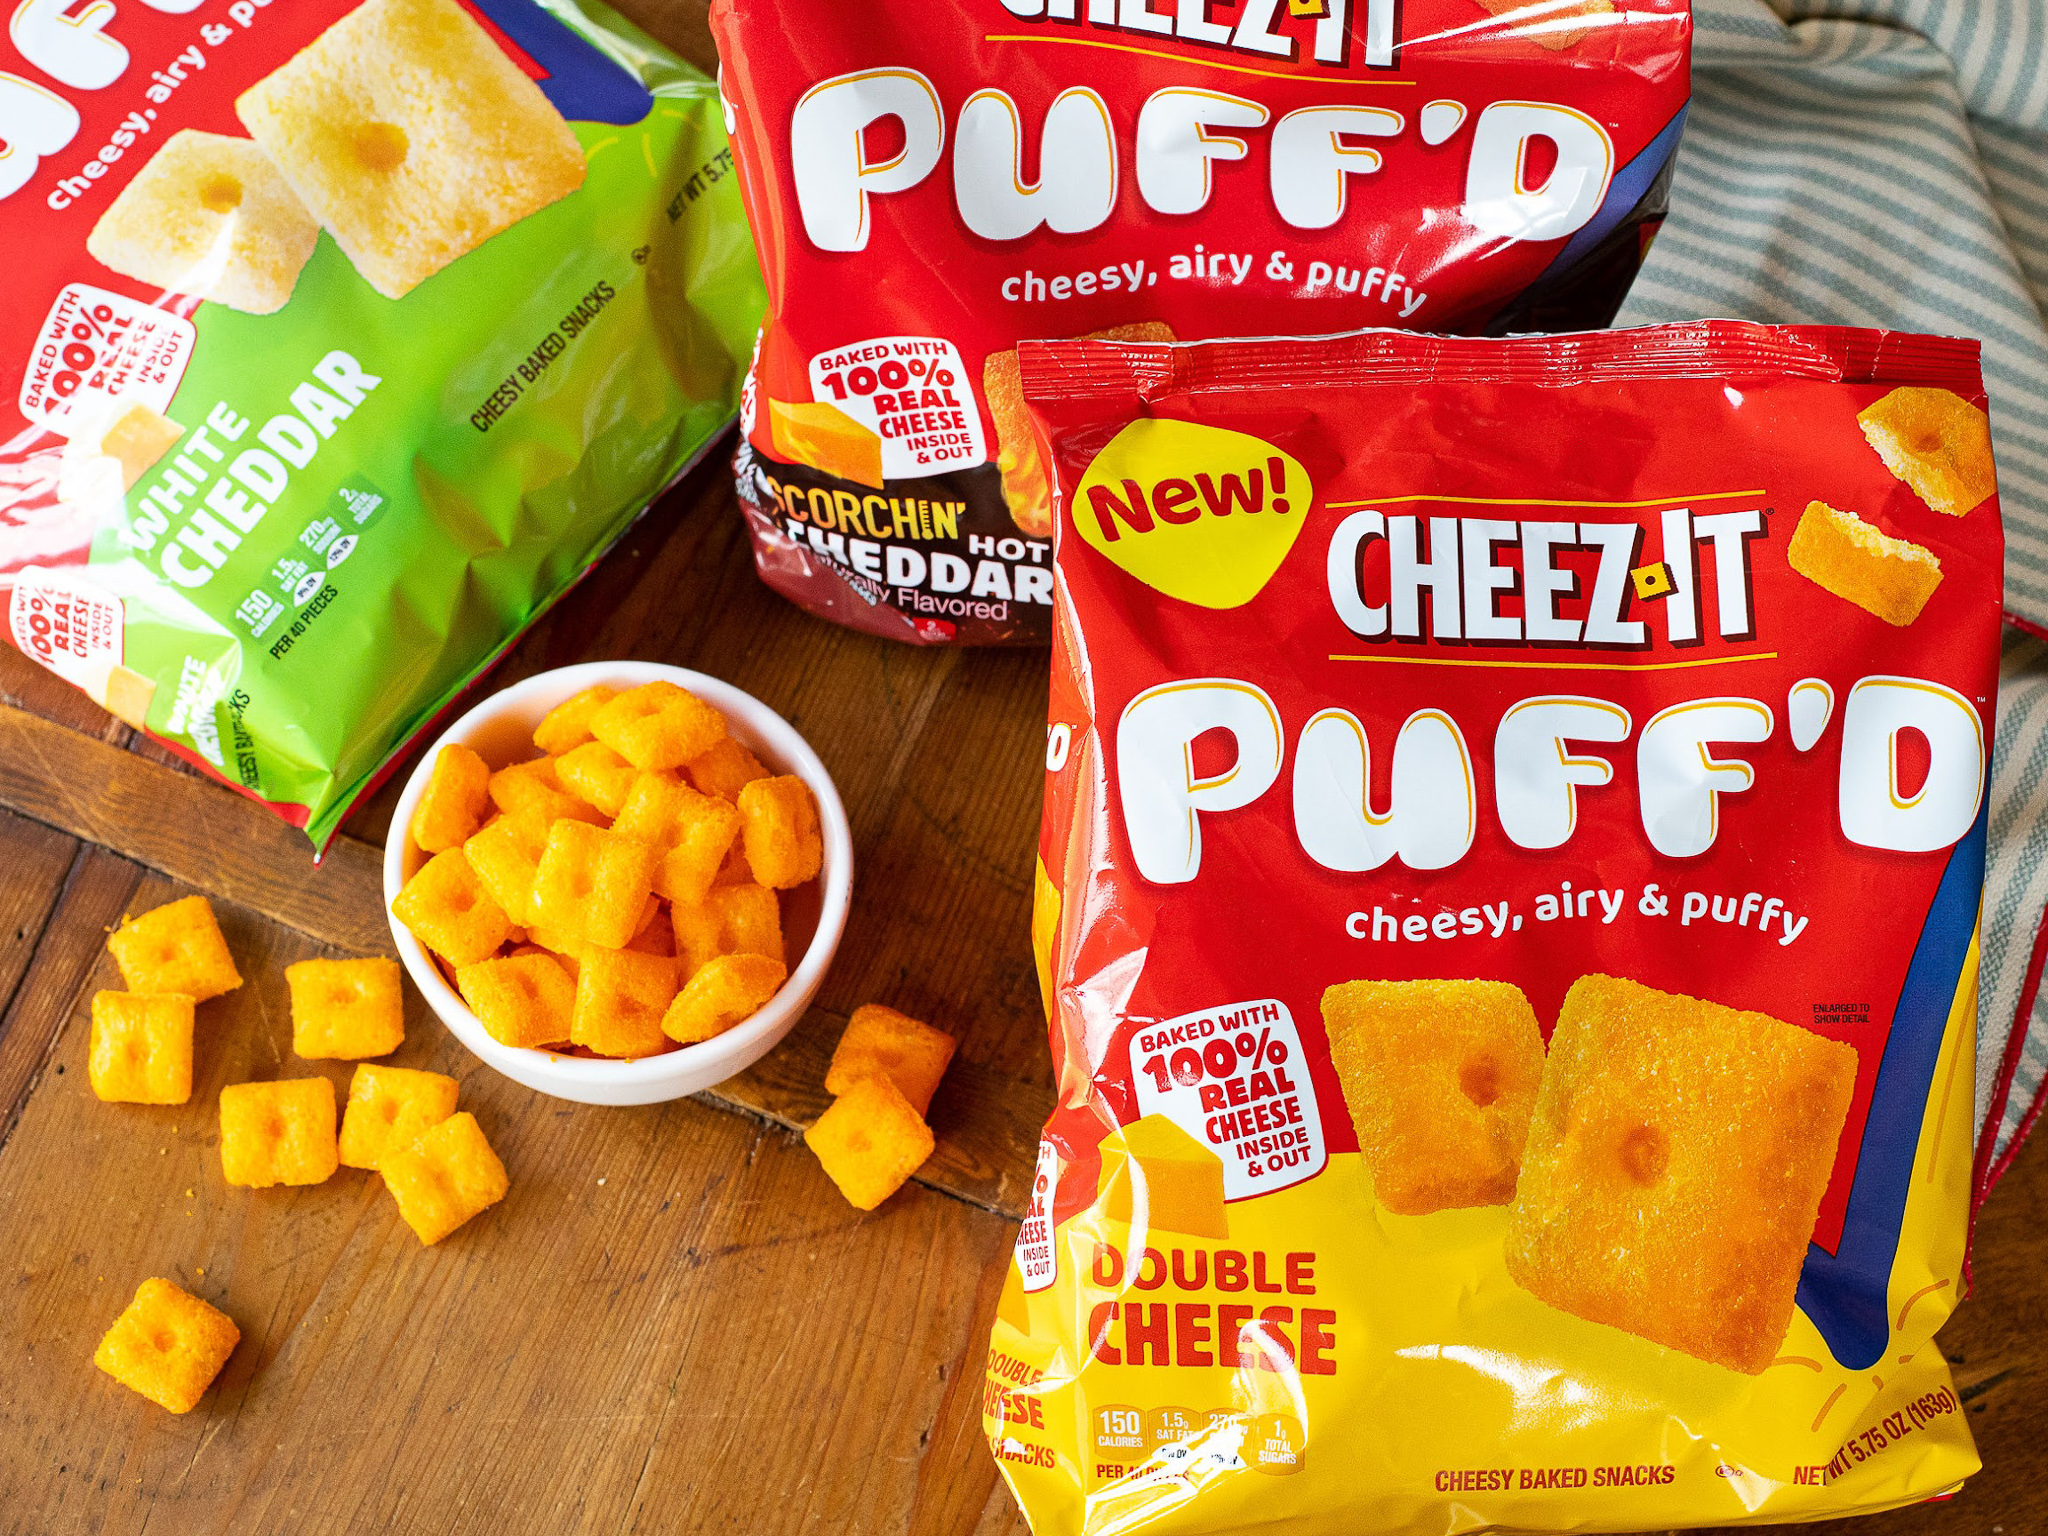 Cheez-It Puff’d Snacks Are As Low As FREE At Publix